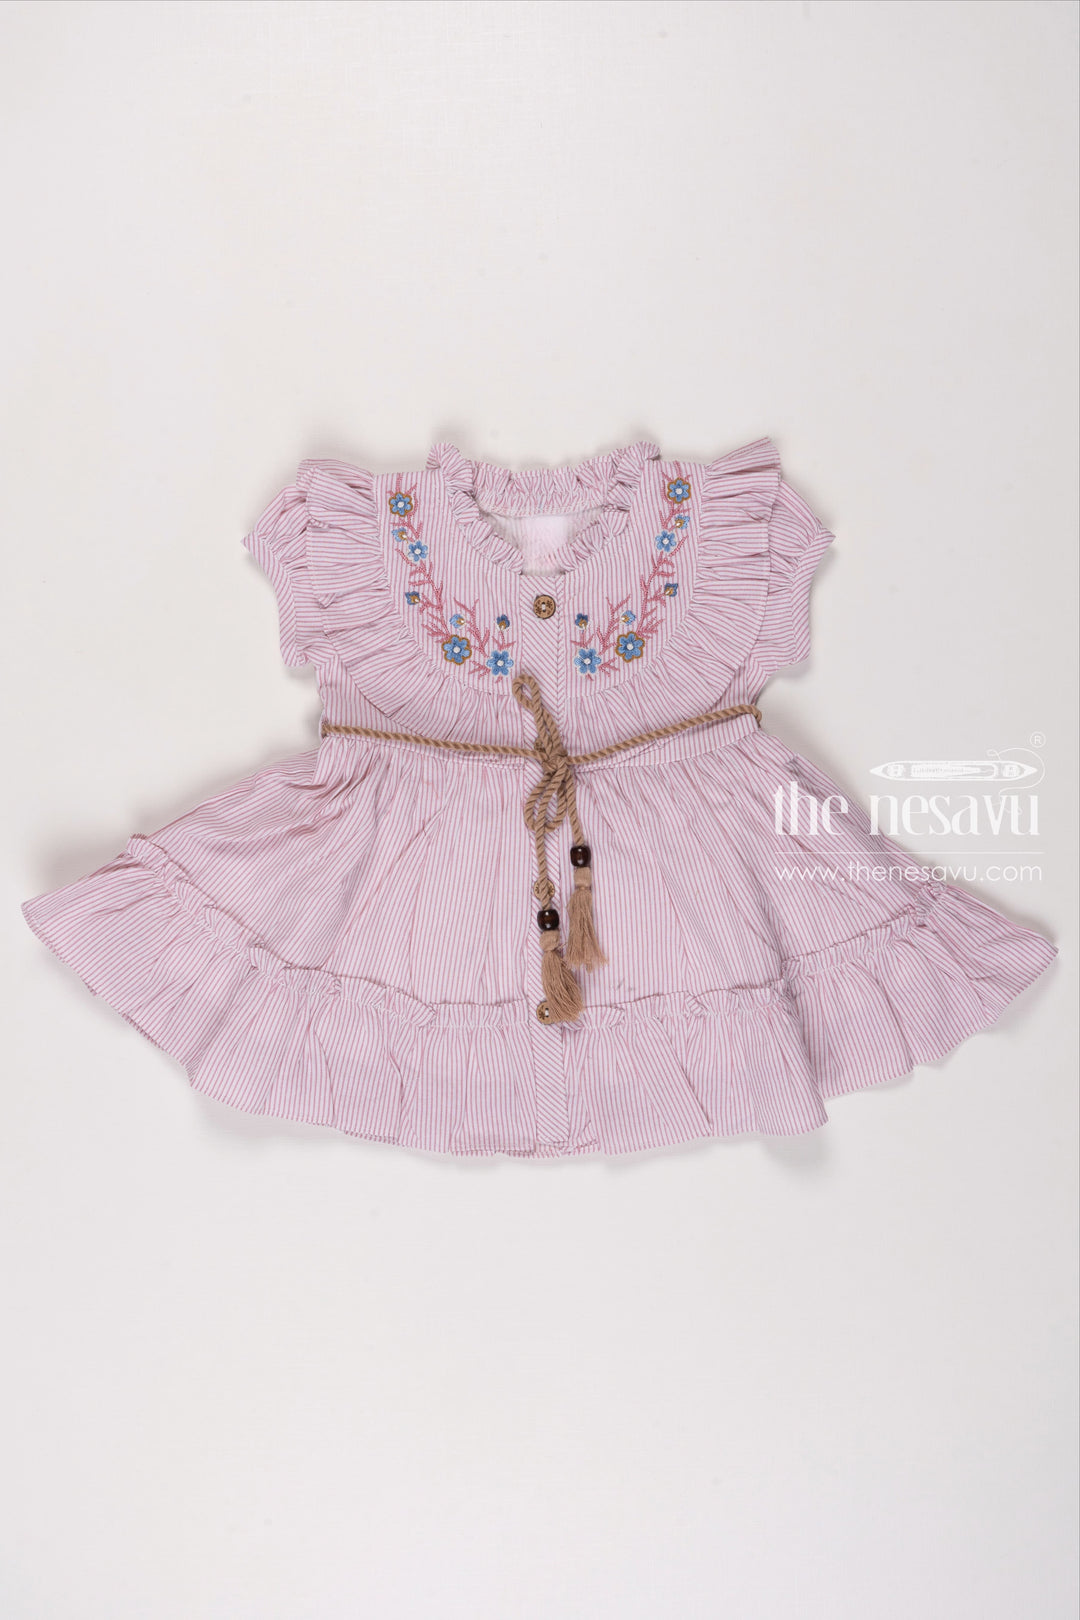 The Nesavu Girls Cotton Frock Blossom Pink Striped Cotton Frock for Girls  Delicate Floral Embroidery & Charming Tassel Detail Nesavu 14 (6M) / Pink / Cotton GFC1224D-14 Girls Pink Striped Cotton Dress | Floral Embroidered Daily Wear Frock | The Nesavu